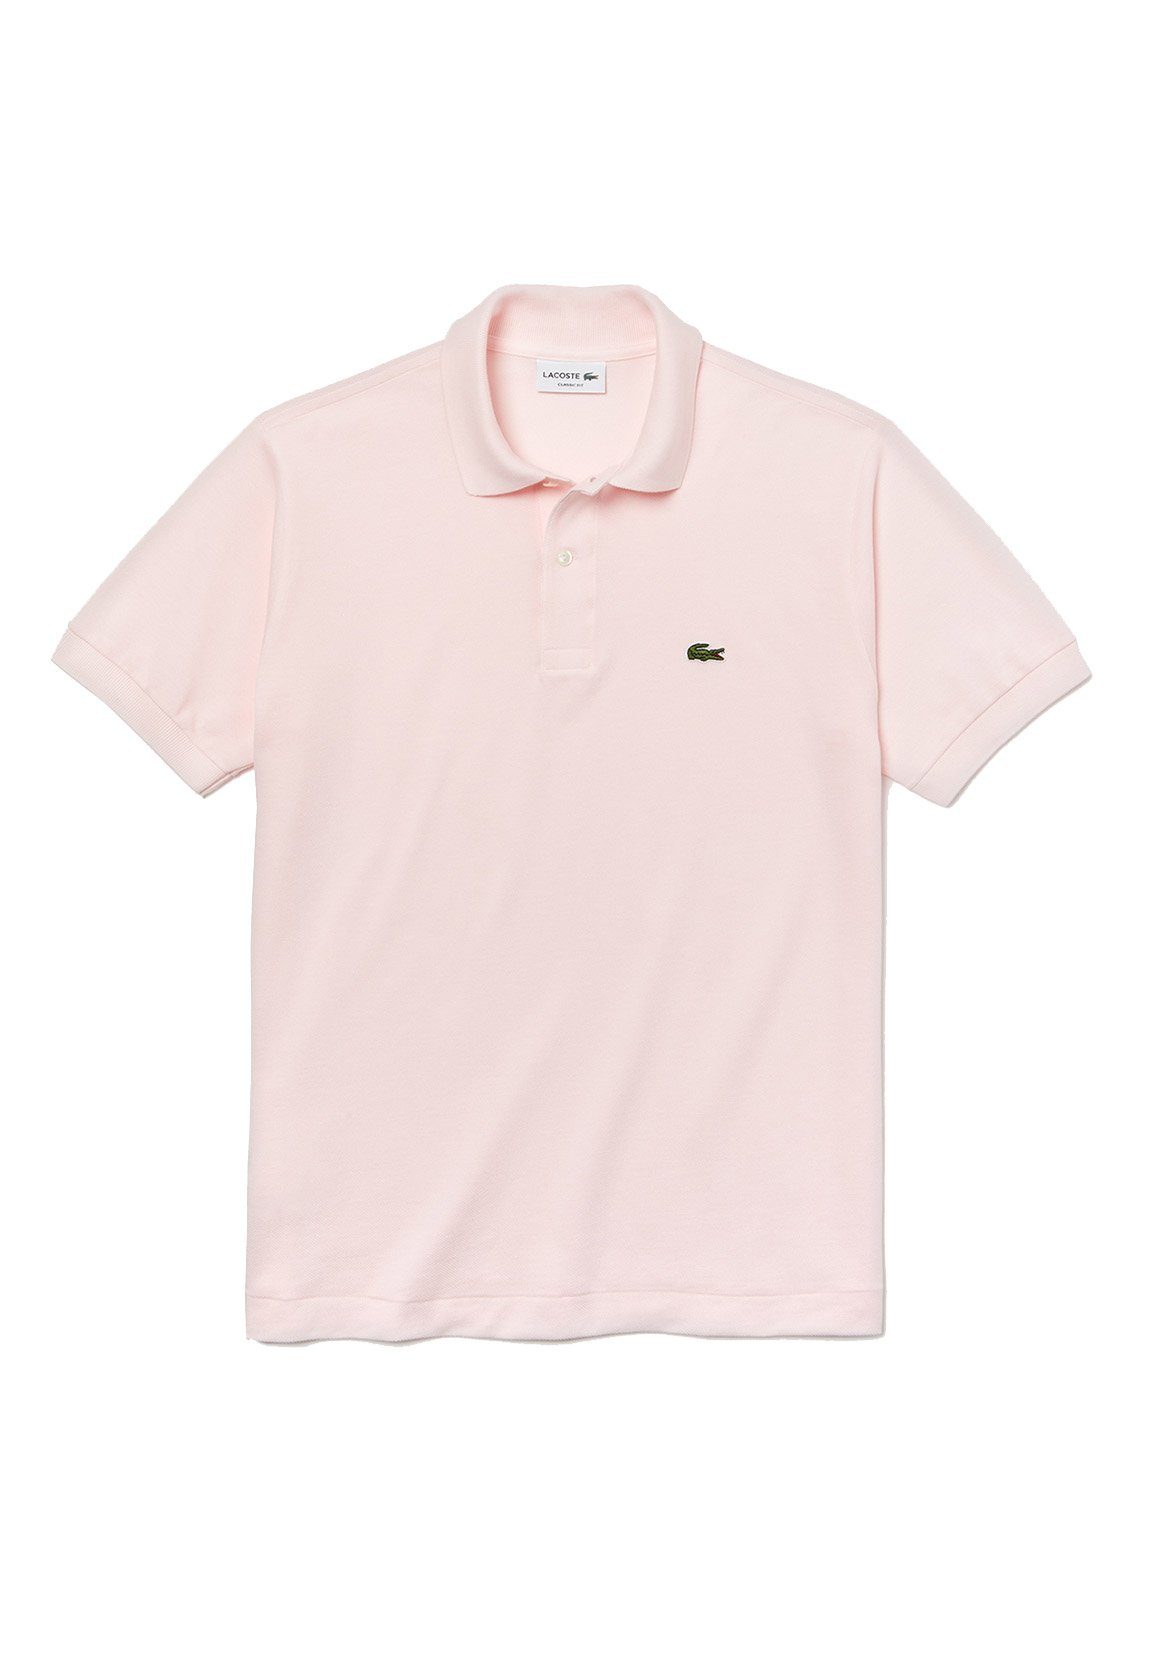 Lacoste Poloshirt Lacoste Polo SHORT SLEEVED RIBBED COLLAR SHIRT L1212 Rose Pale Rosa